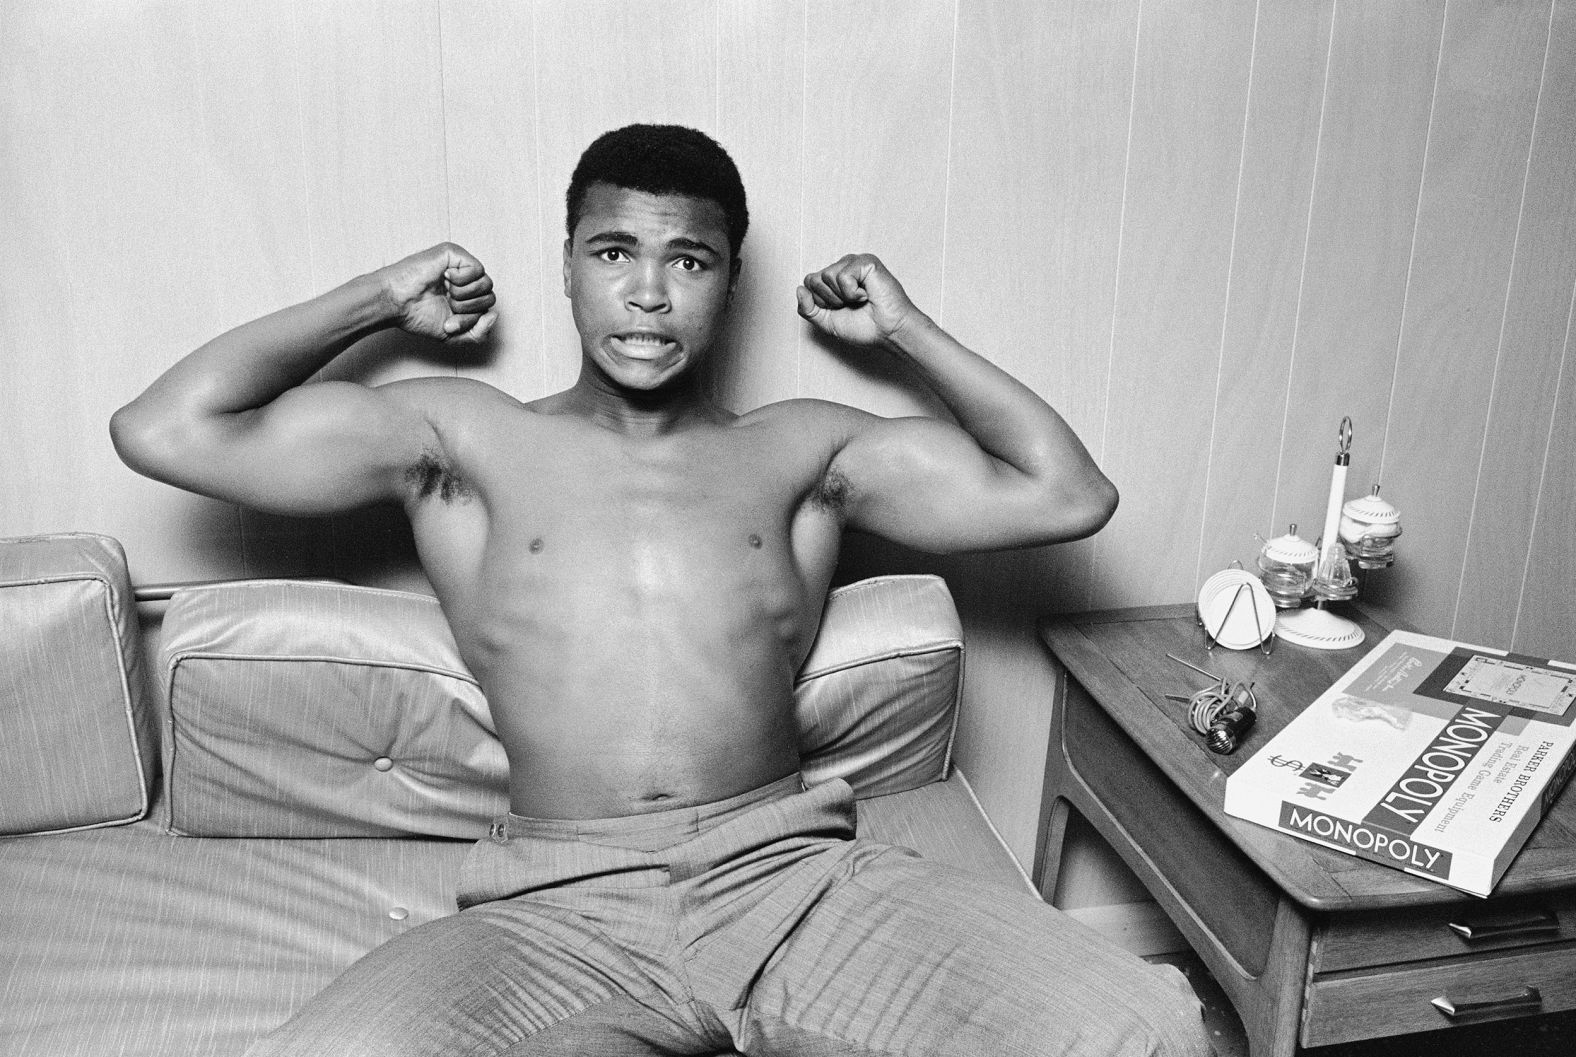 Boxing great Muhammad Ali strikes a playful pose in Louisville, Kentucky, in 1963. Schapiro was on assignment for Sports Illustrated, and this was early in the boxer's career. Schapiro said he saw a different side of Ali. "He really was extremely quiet and incredibly polite — in every way, just a terrific person," <a href="https://www.rollingstone.com/culture/culture-features/steve-schapiro-muhammad-ali-boxer-photos-cassius-clay-704087/" target="_blank" target="_blank">Schapiro told Rolling Stone in 2018.</a>